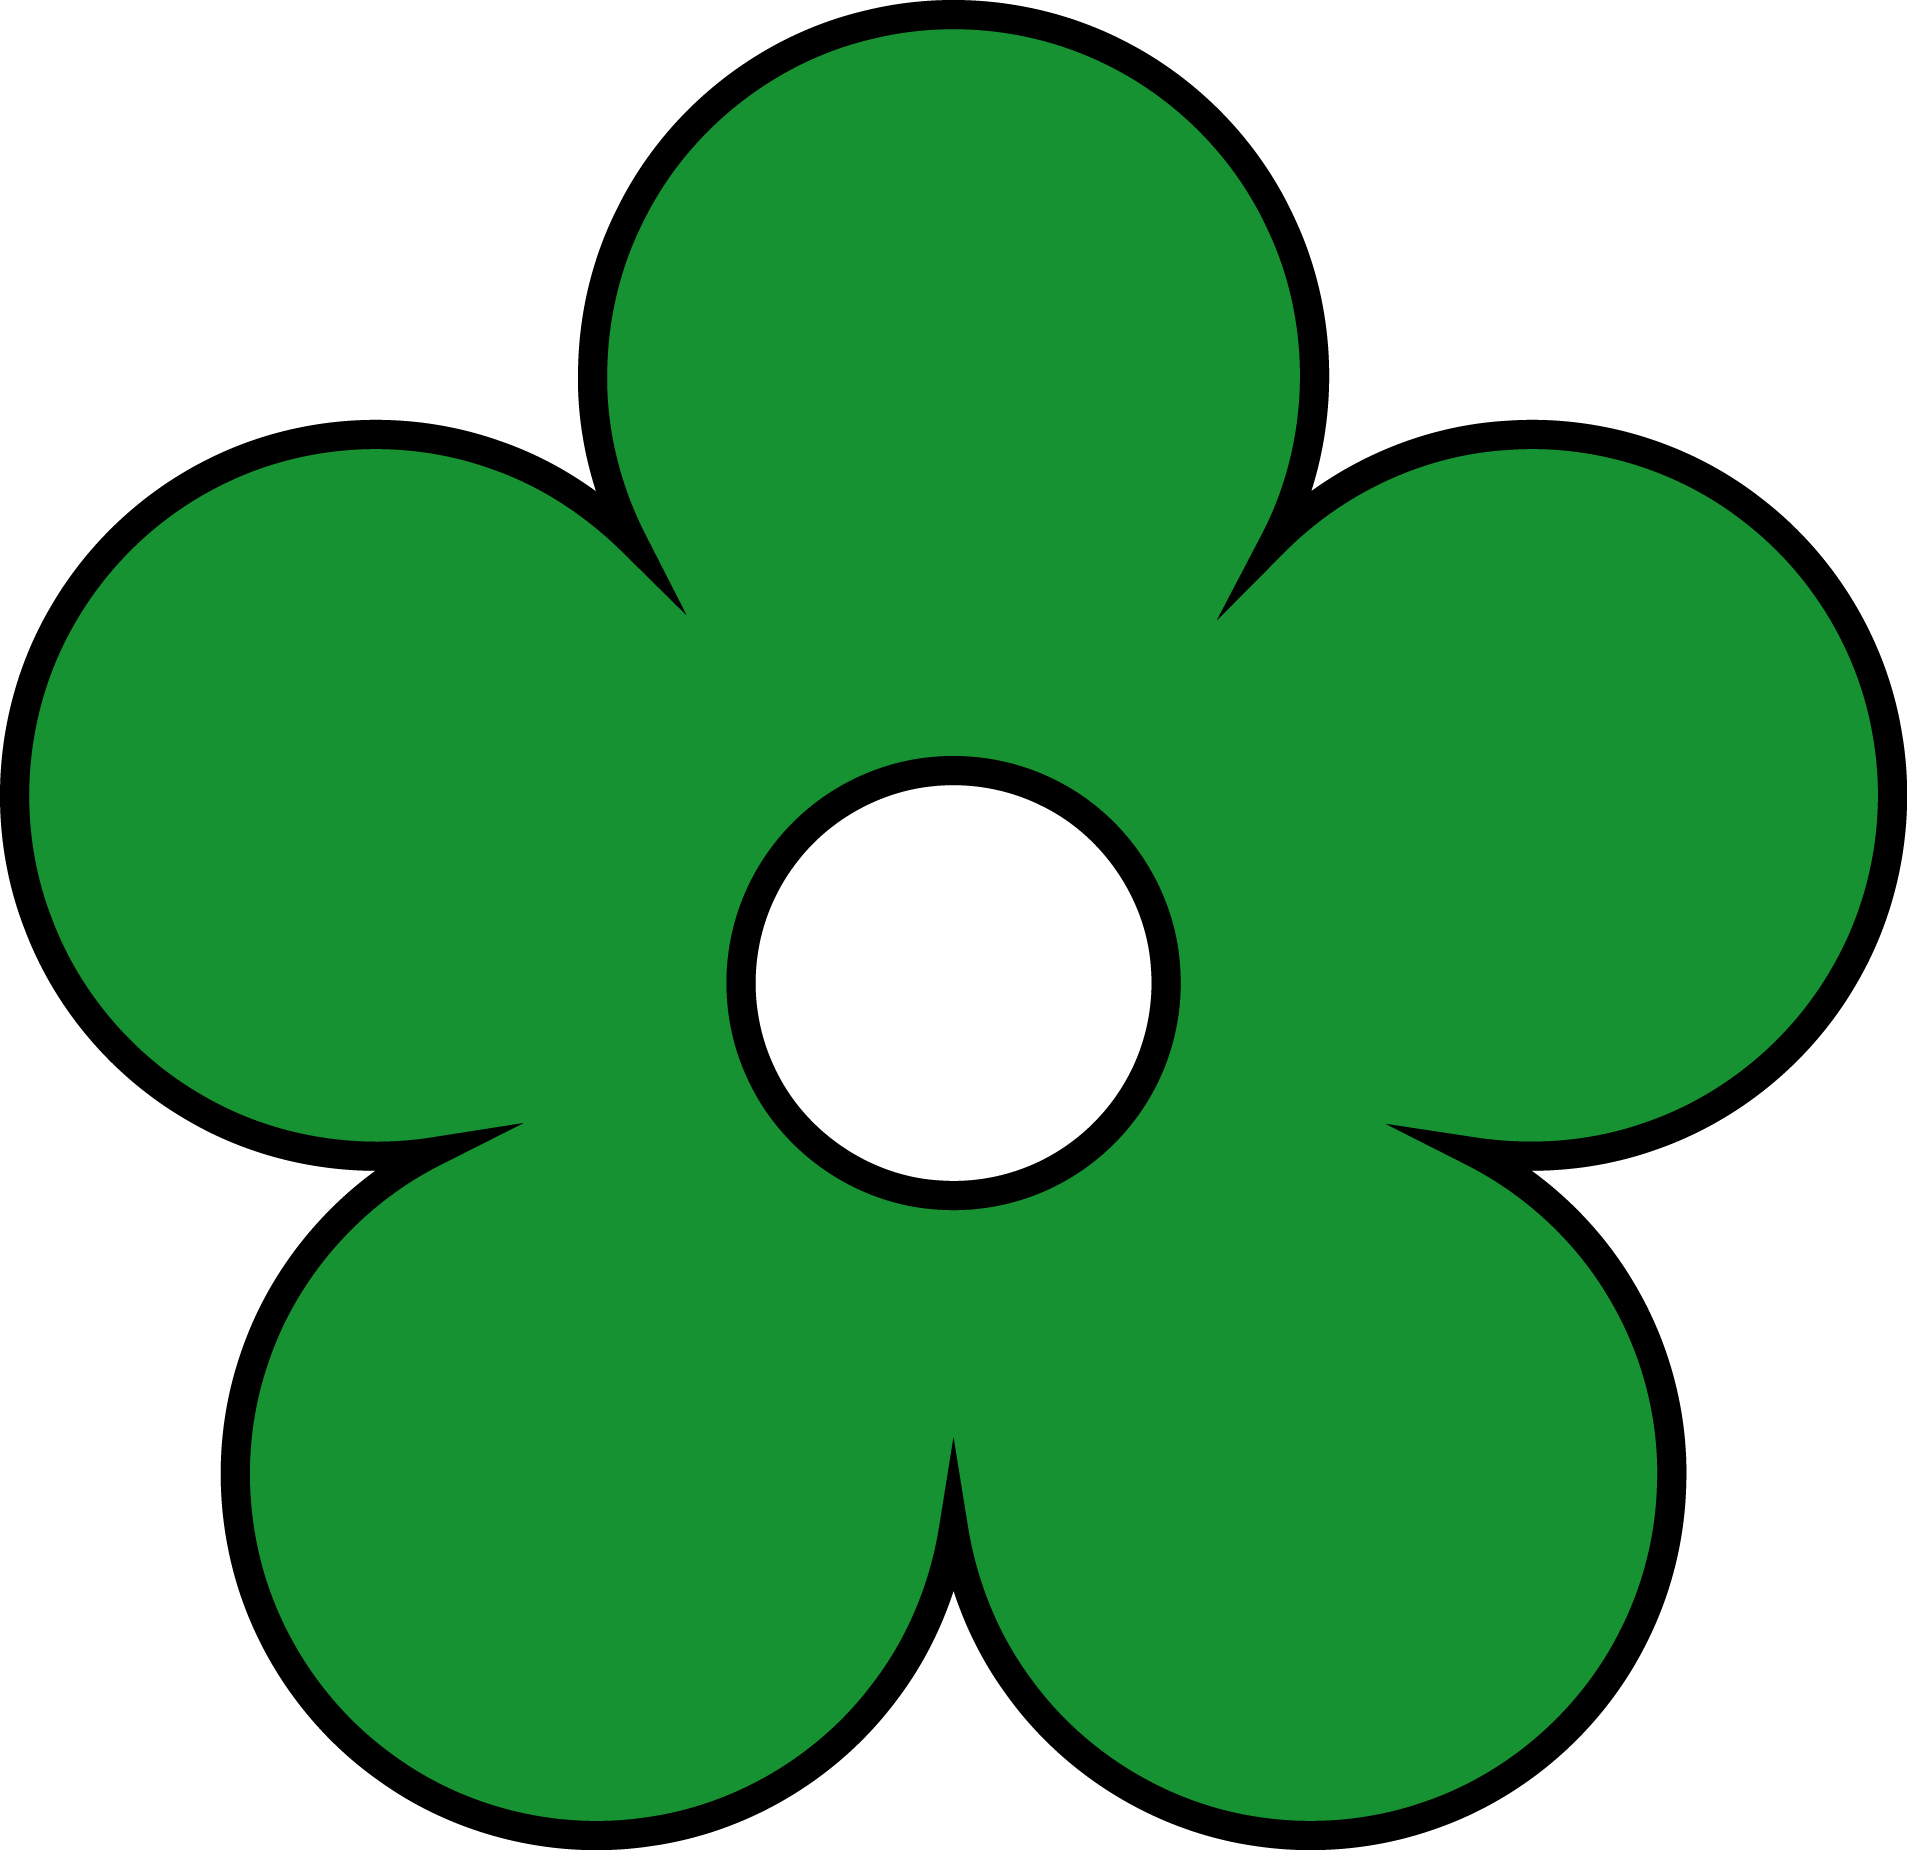 Flower clipart green.  collection of png